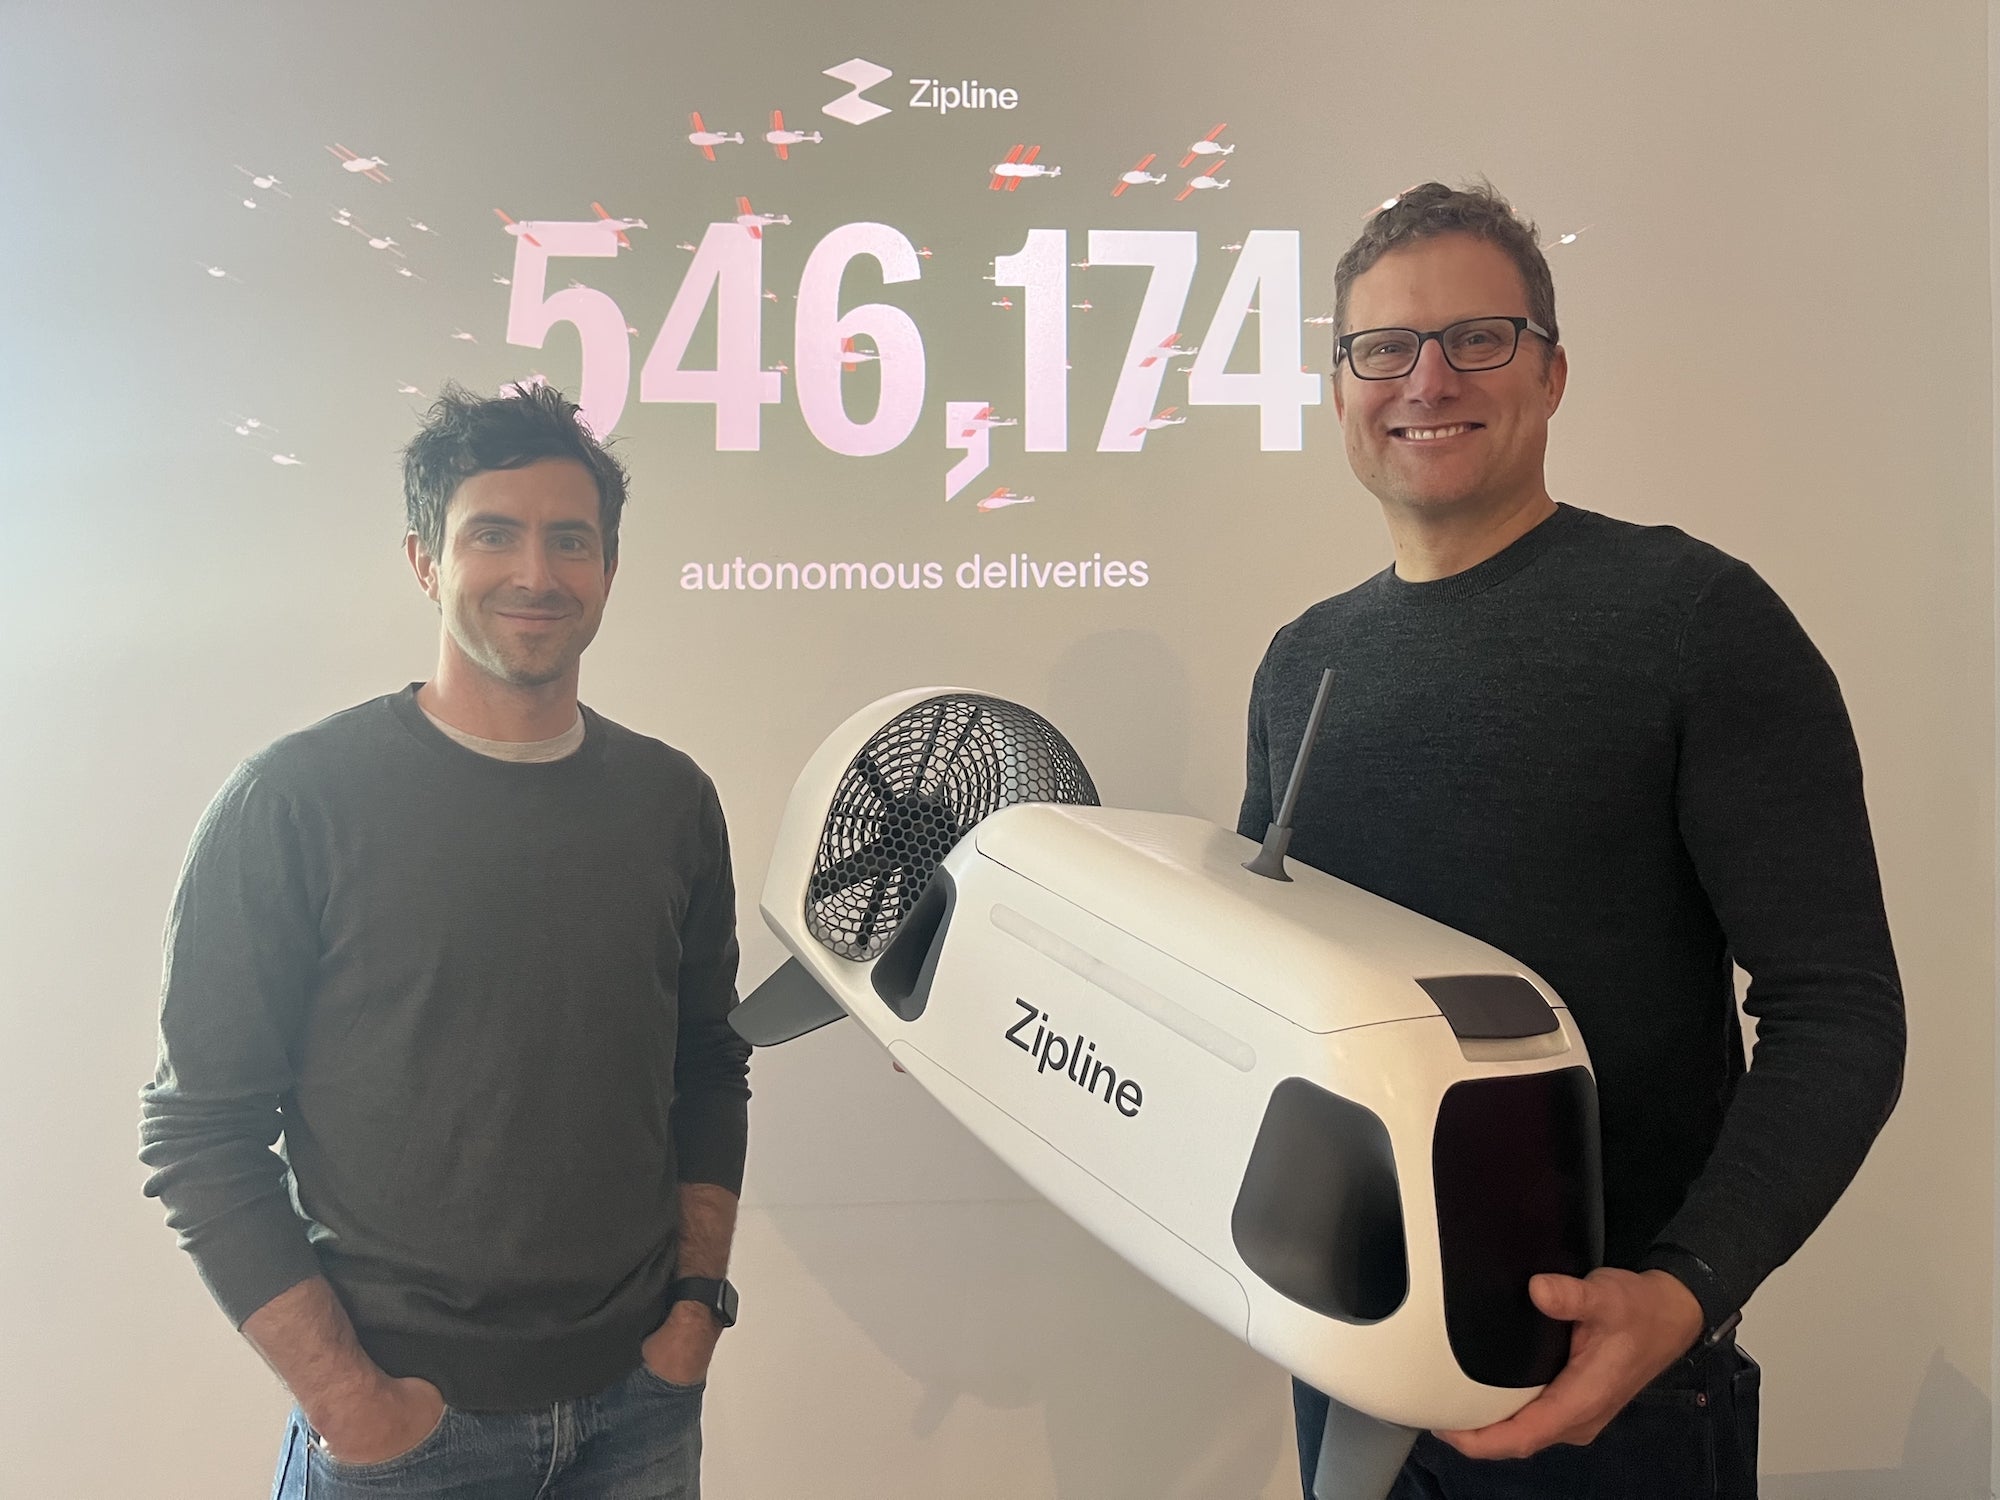 This drone company plans to make deliveries by lowering a small droid into your yard